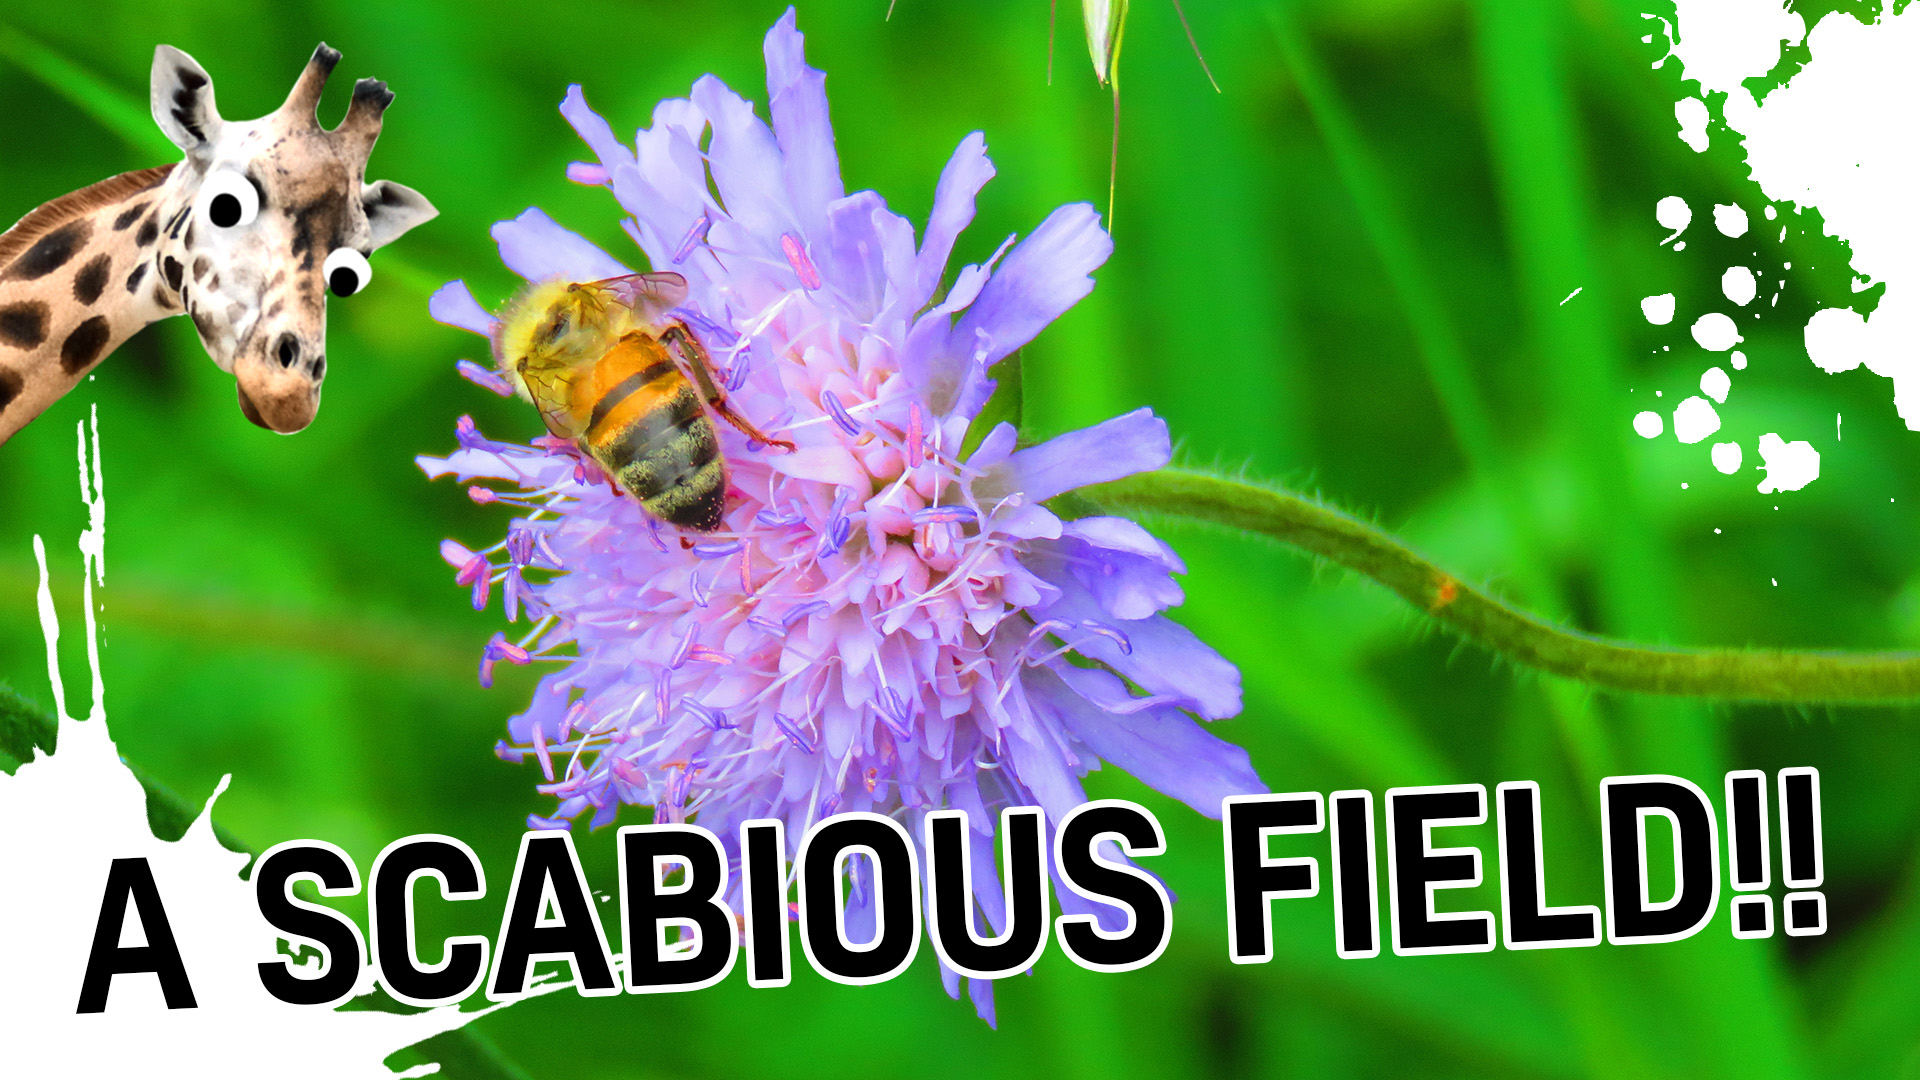 Result: Scabious Field